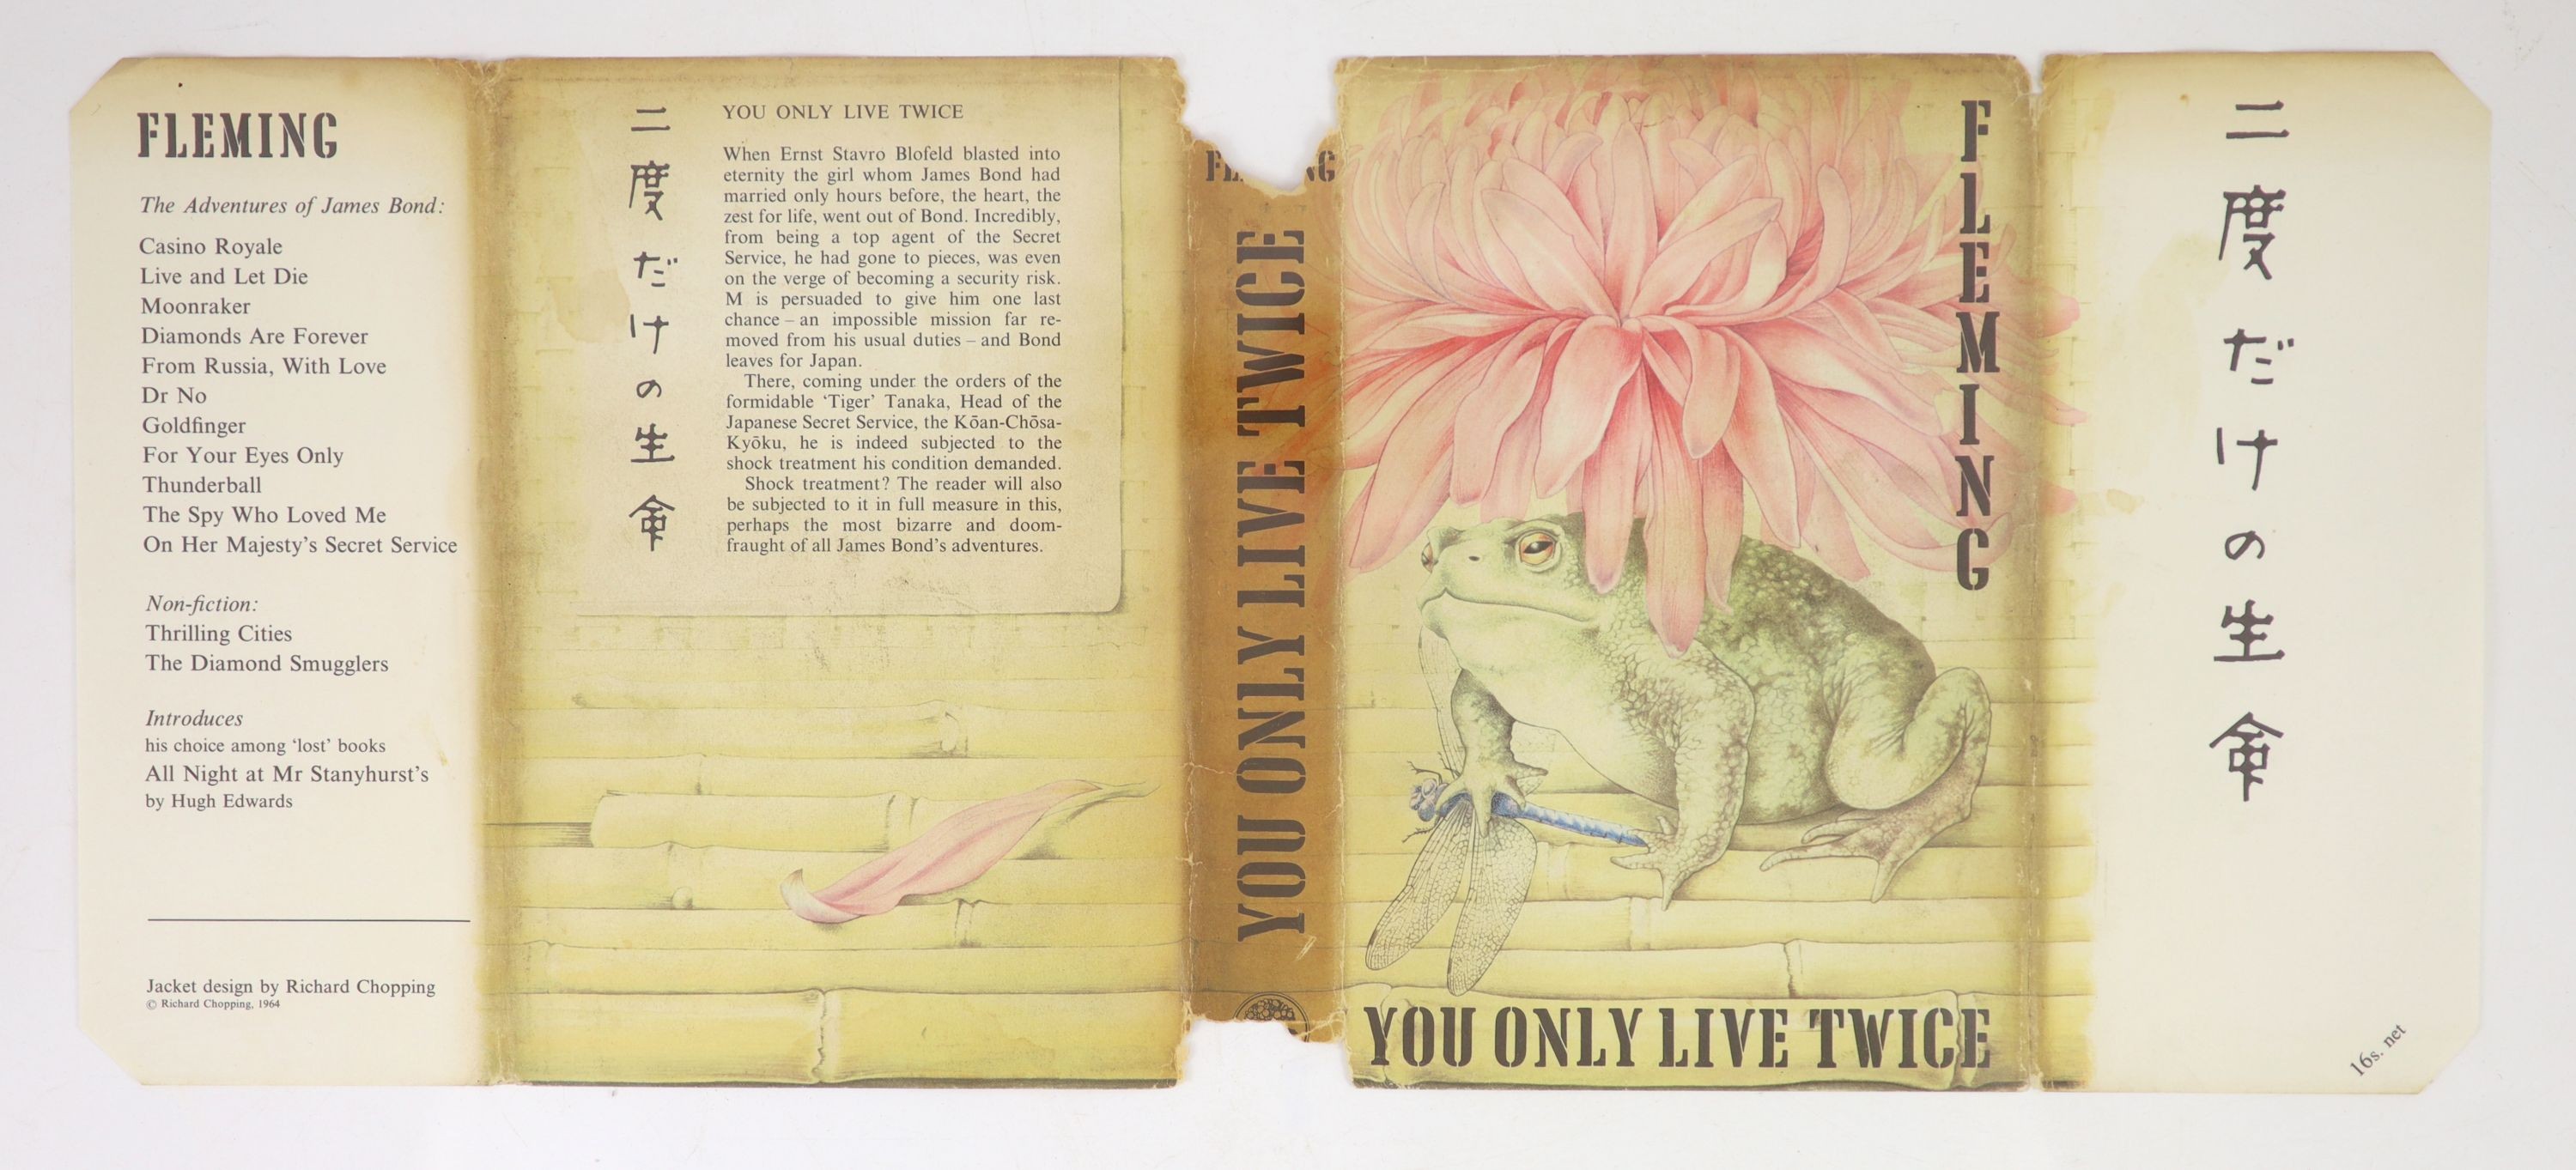 Fleming, Ian - You Only Live Twice, 1st edition, 8vo, black cloth with strip of seven gilt-stamped Japanese characters, with unclipped d/j, Jonathan Cape, London, 1964